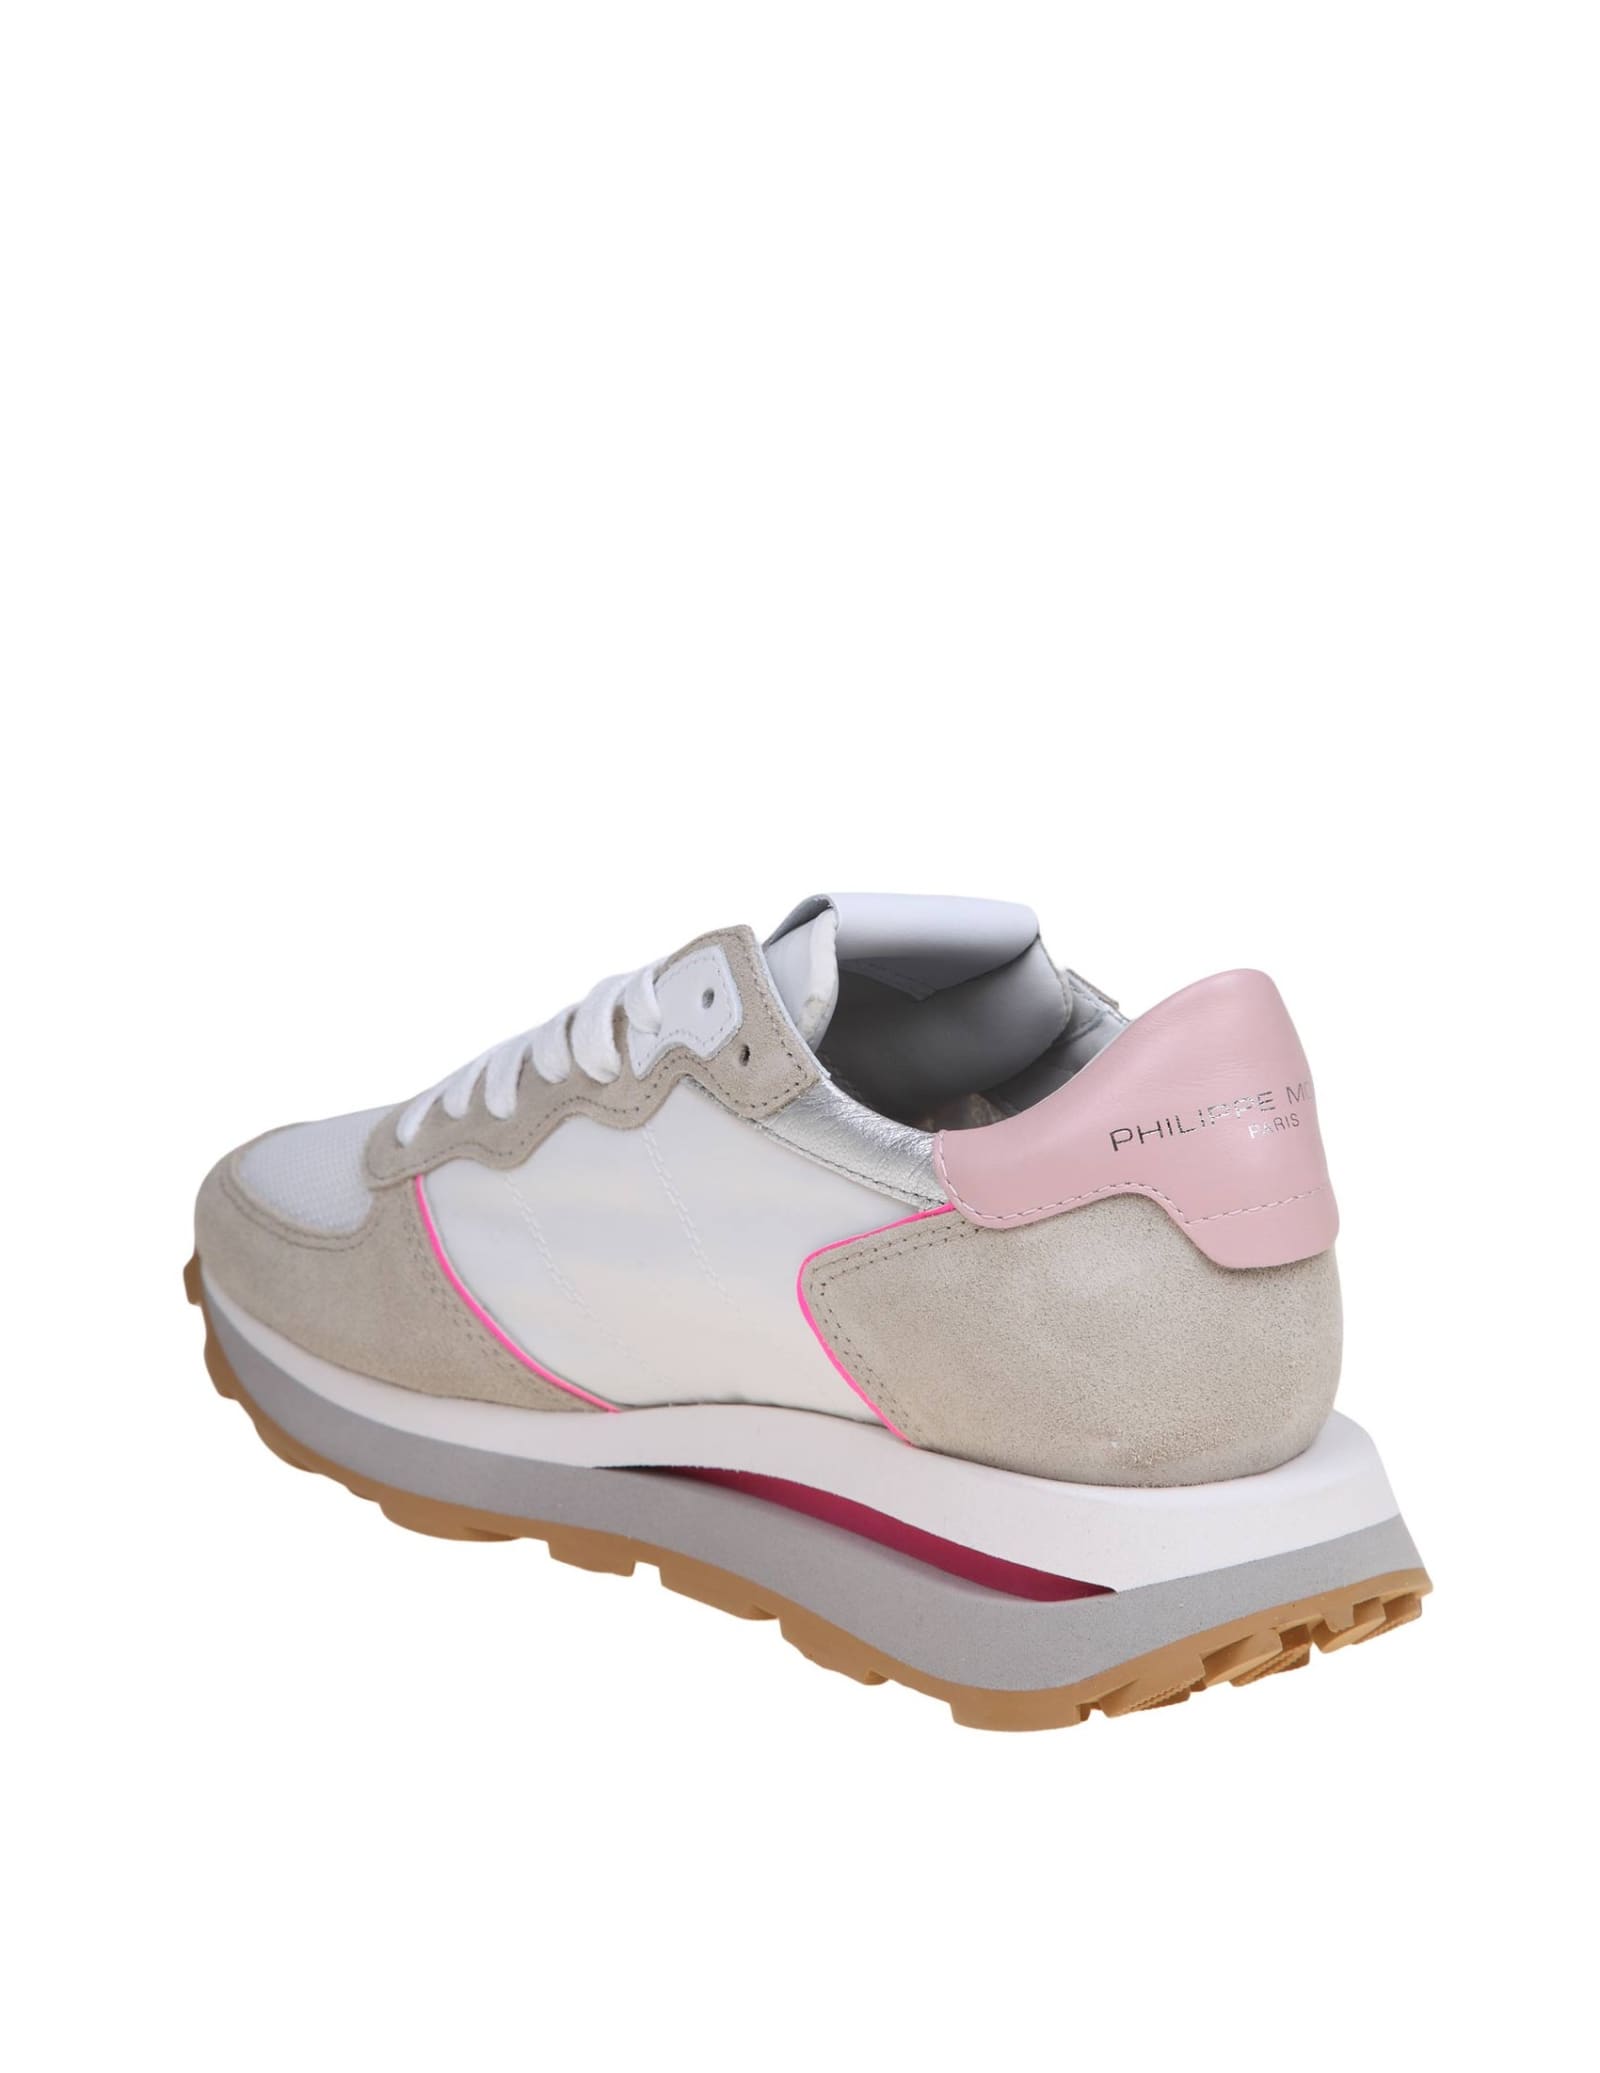 Shop Philipp Plein Philippe Model Tropez Sneakers In Suede And Nylon Color White And Pink In White/rose